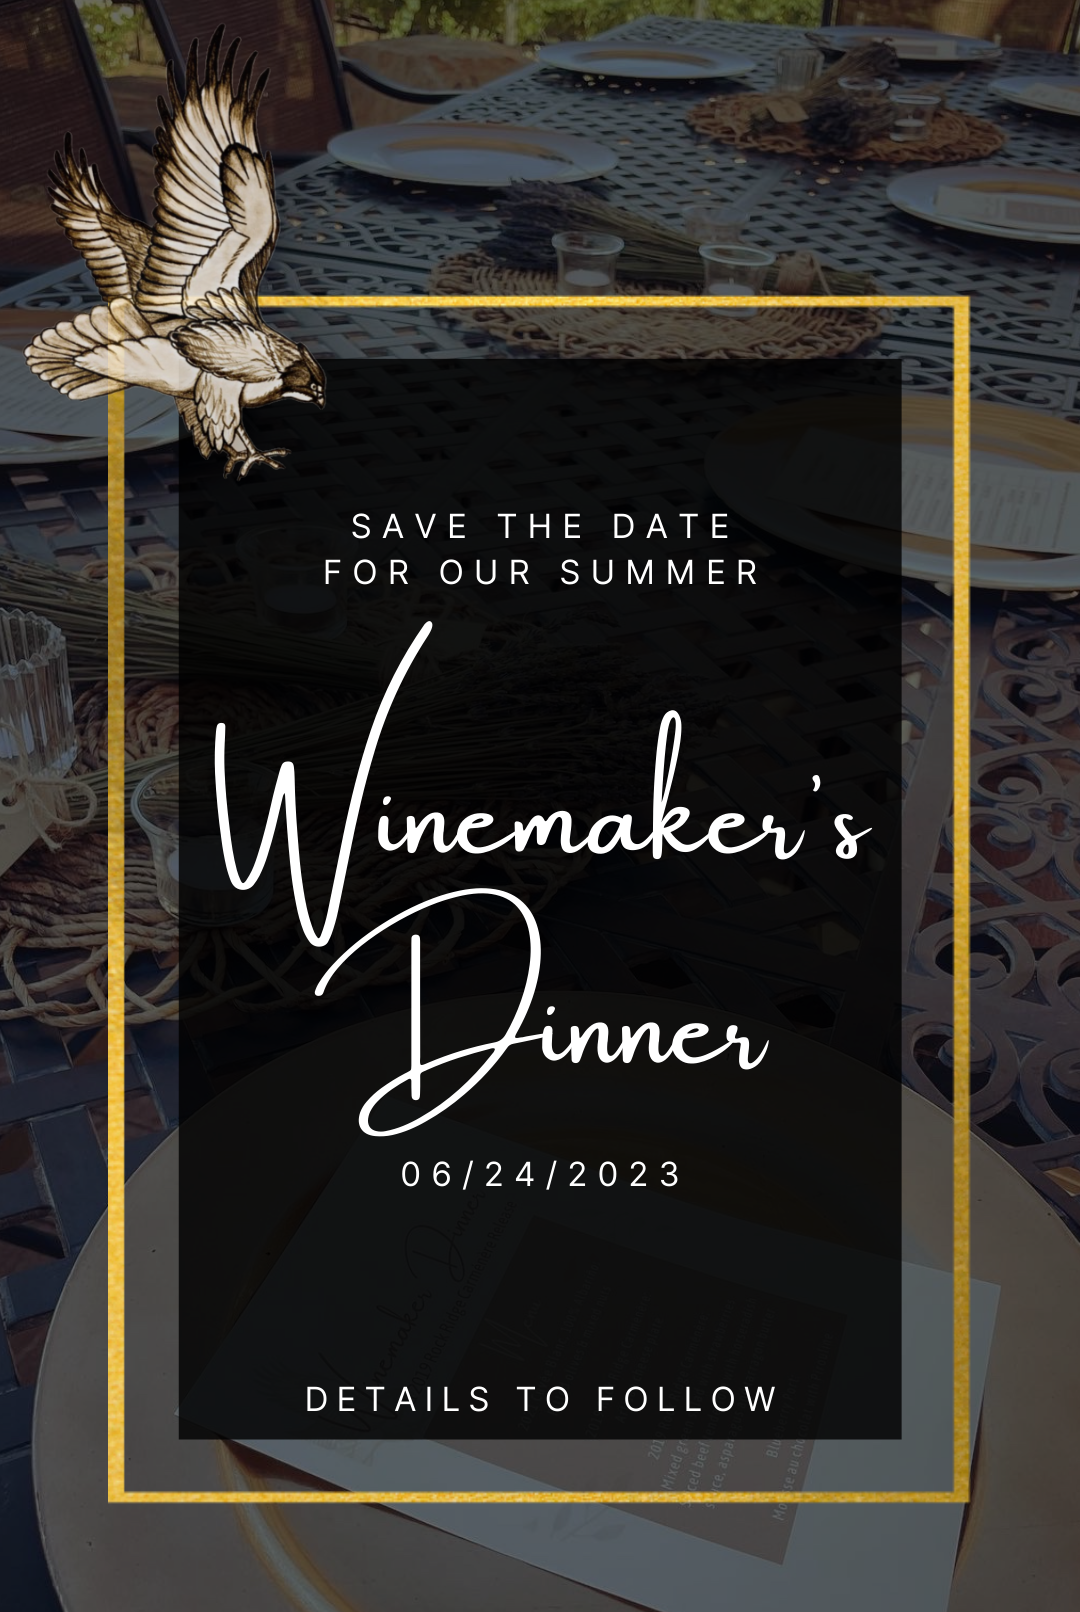 Save the Date, winemaker dinner June 24, 2023, details to follow